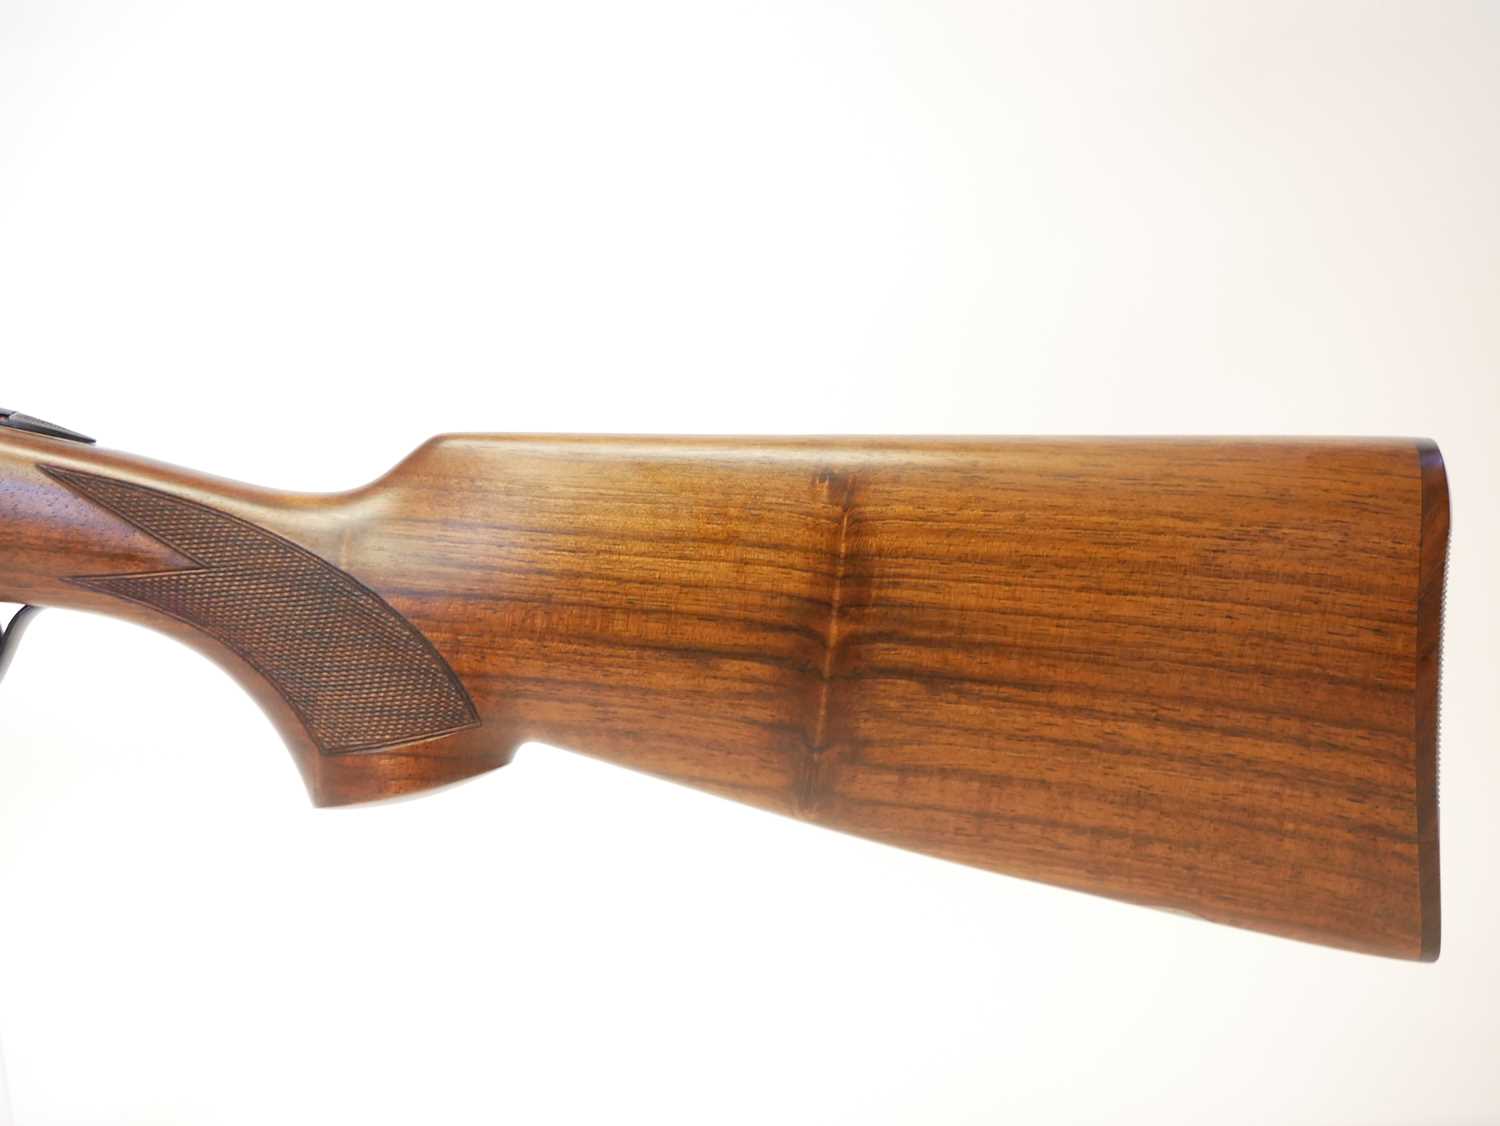 Beretta S687 12 bore over and under shotgun, serial number E82646B, 28inch barrels with three - Image 10 of 15